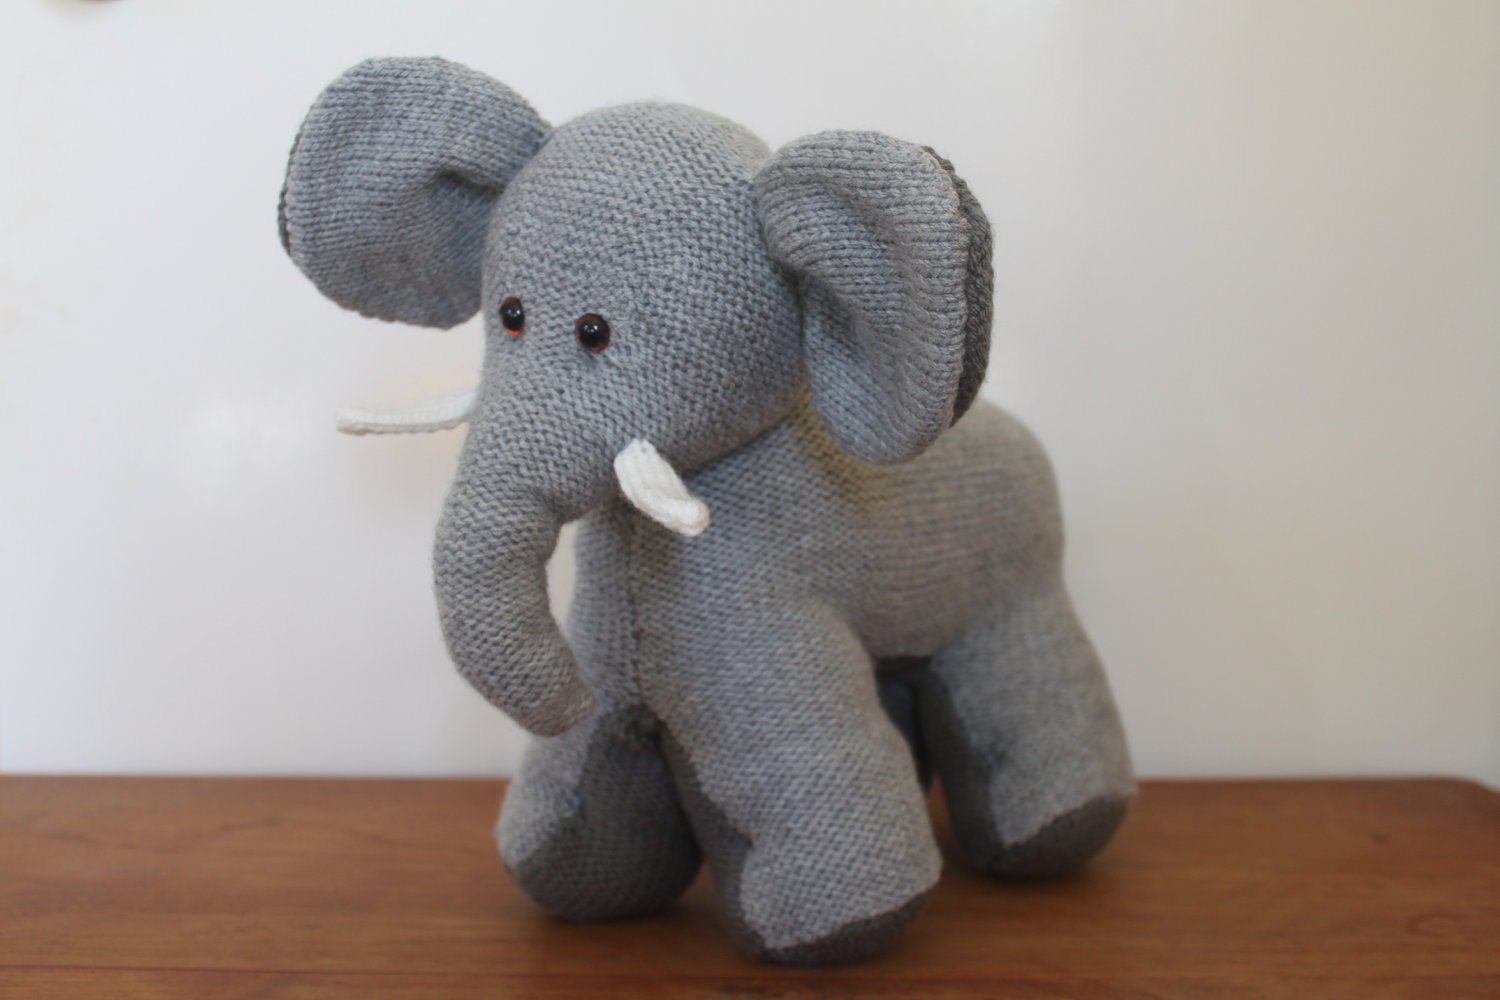 Handmade Knitted Elephant by SnugglyCritters on Etsy